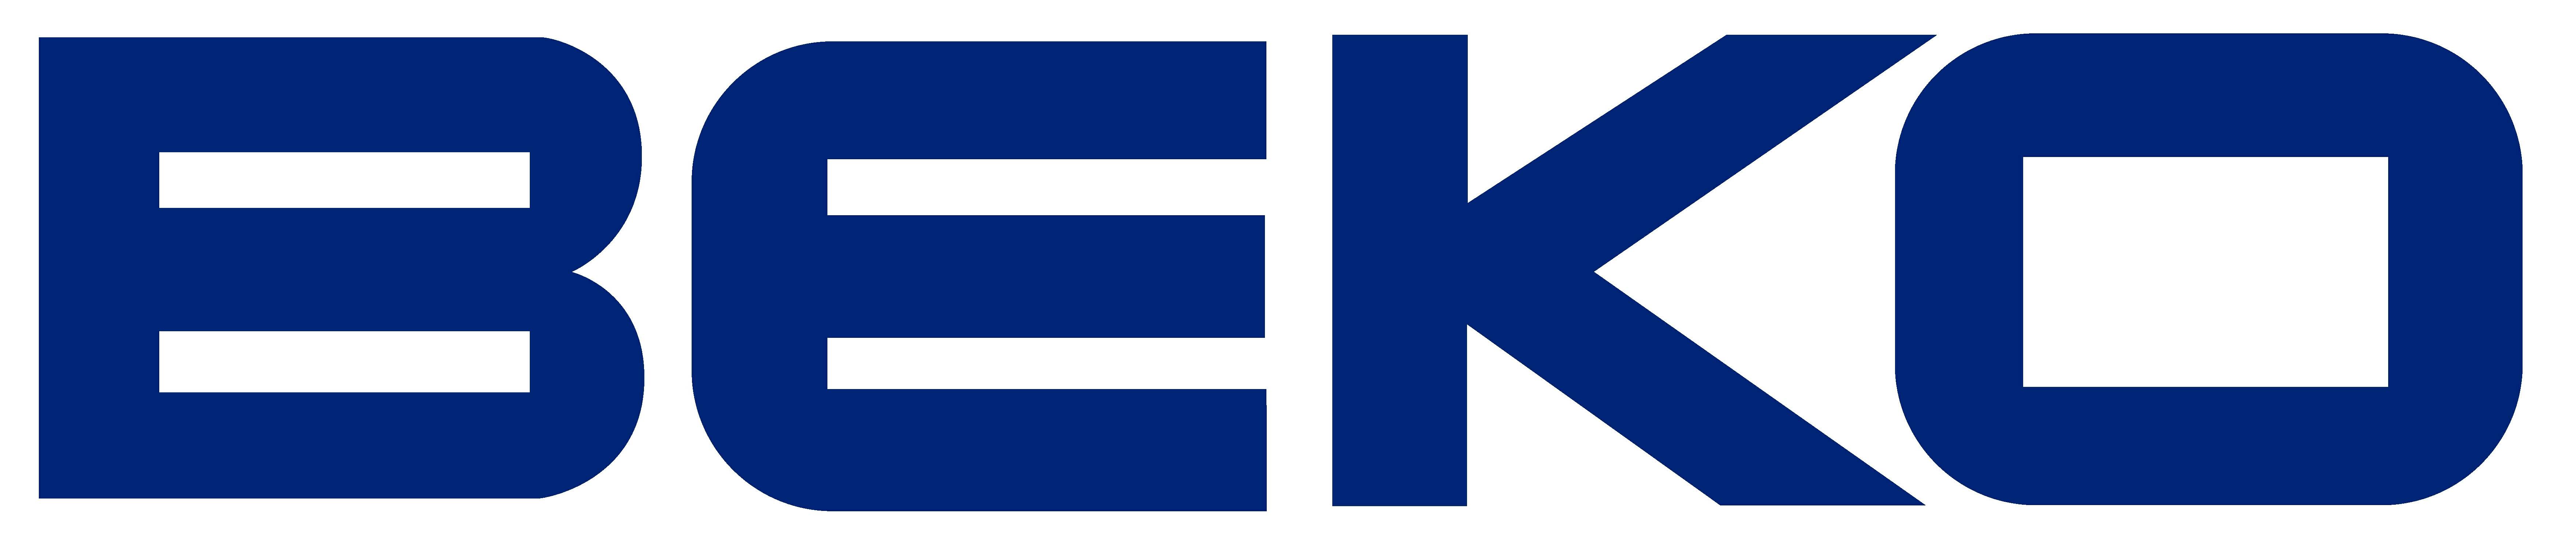 Beko logo Download in HD Quality